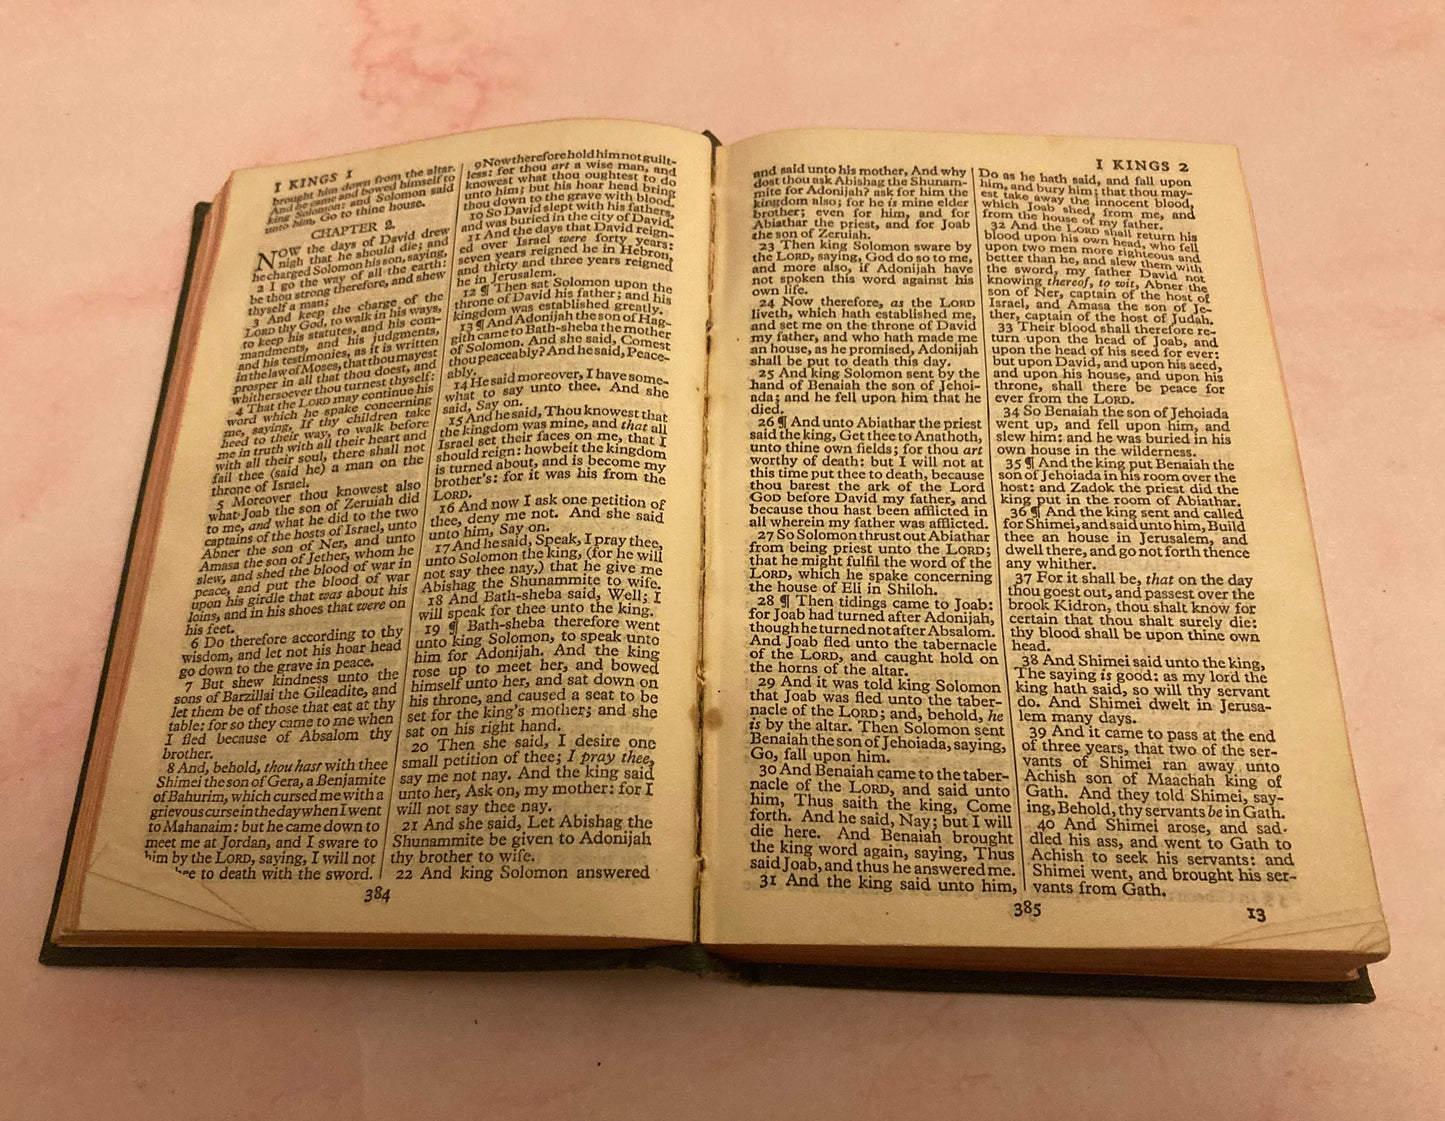 Holy Bible - Small Green Vintage Hardcover Bible - (Ref x215)